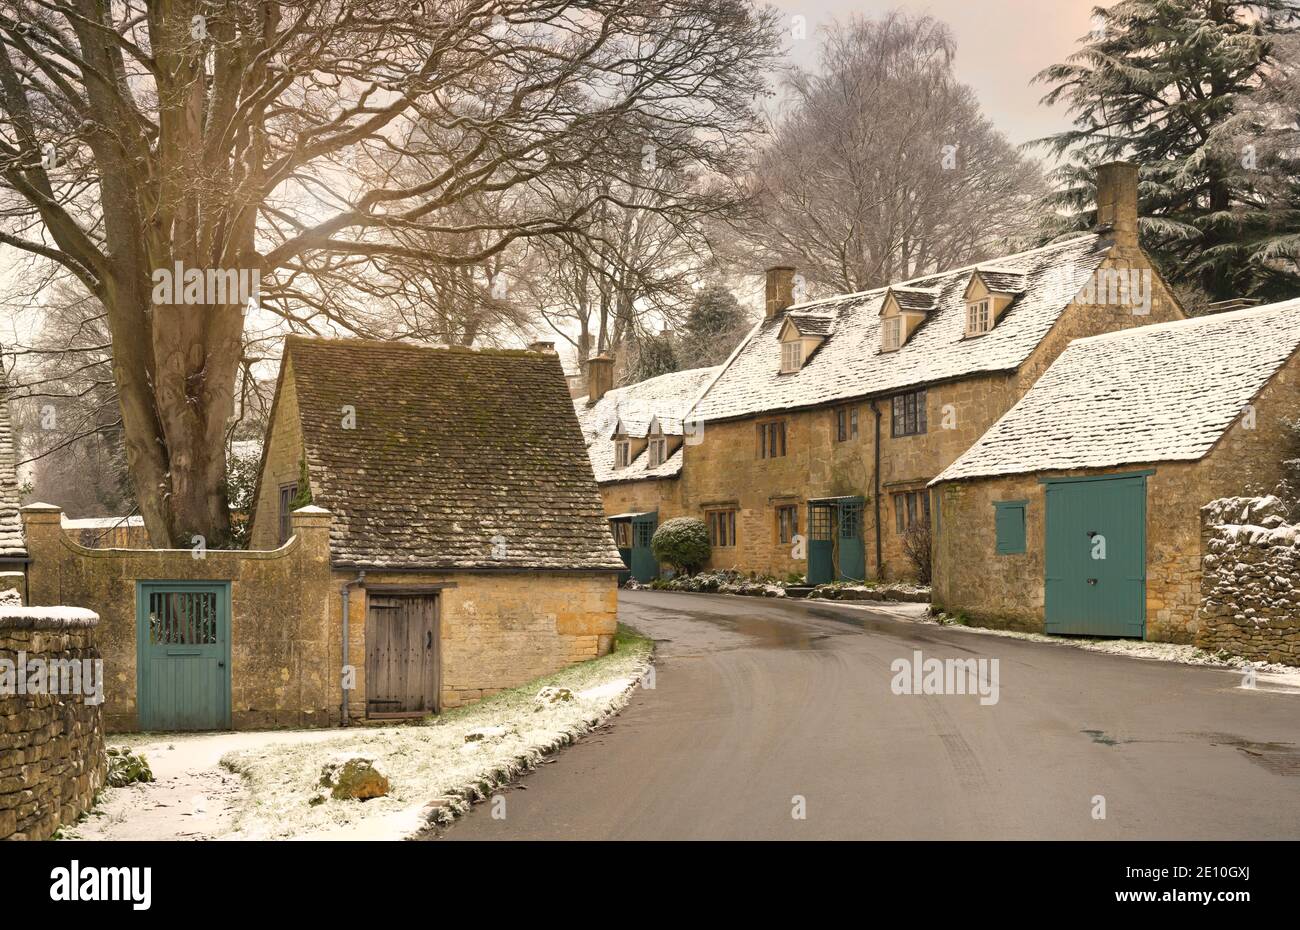 Snowshill villaggio in neve, Cotswolds, Gloucestershire, Inghilterra. Foto Stock